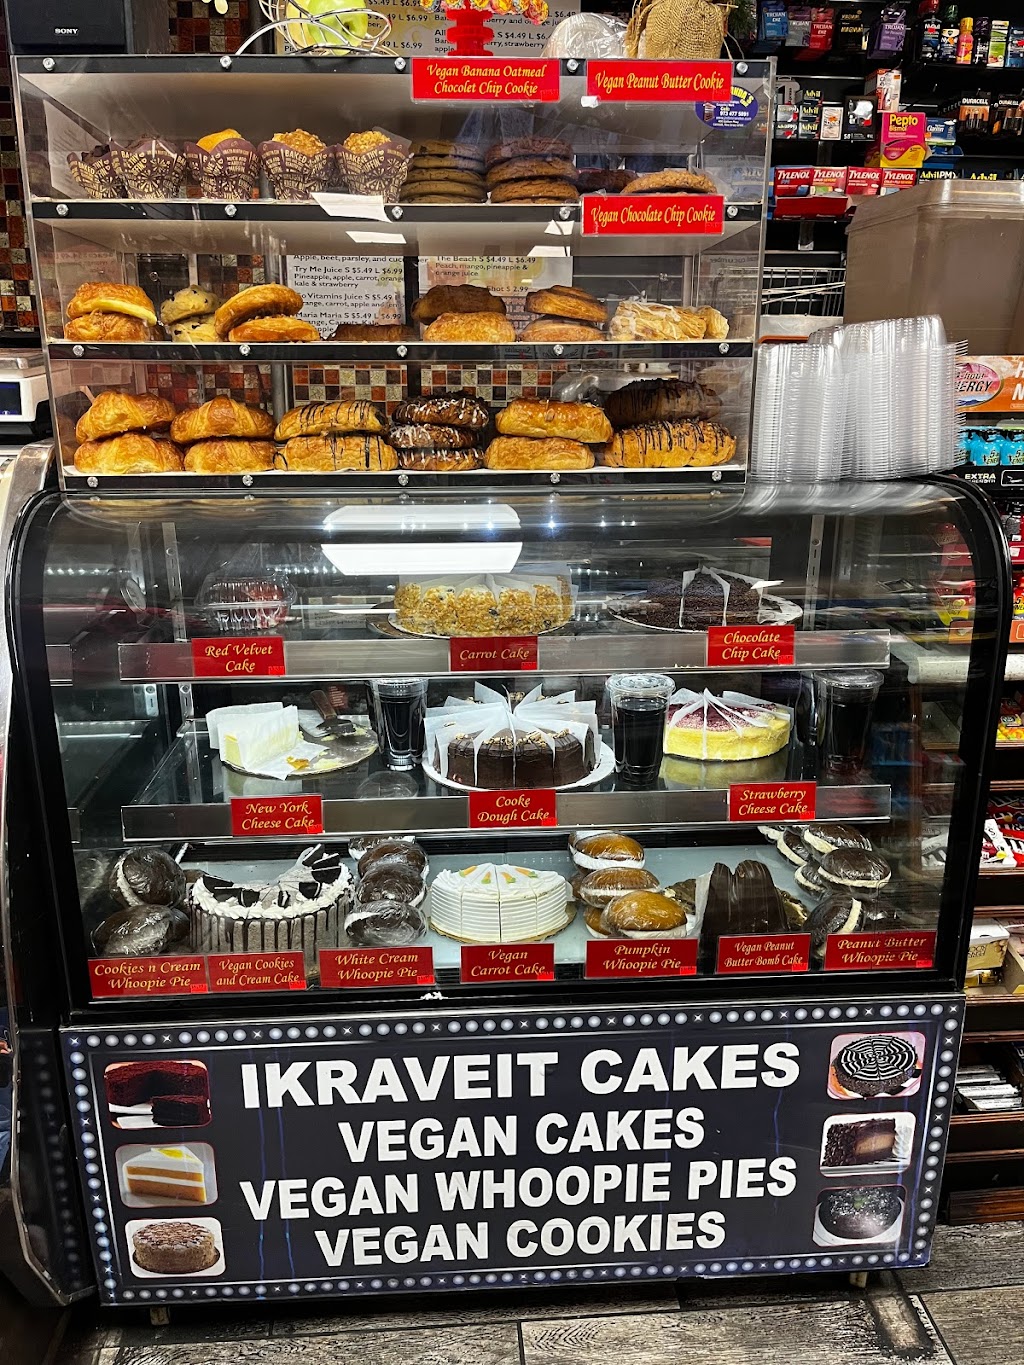 iKraveit Foods | 34-02 30th St, Queens, NY 11106 | Phone: (718) 777-0030